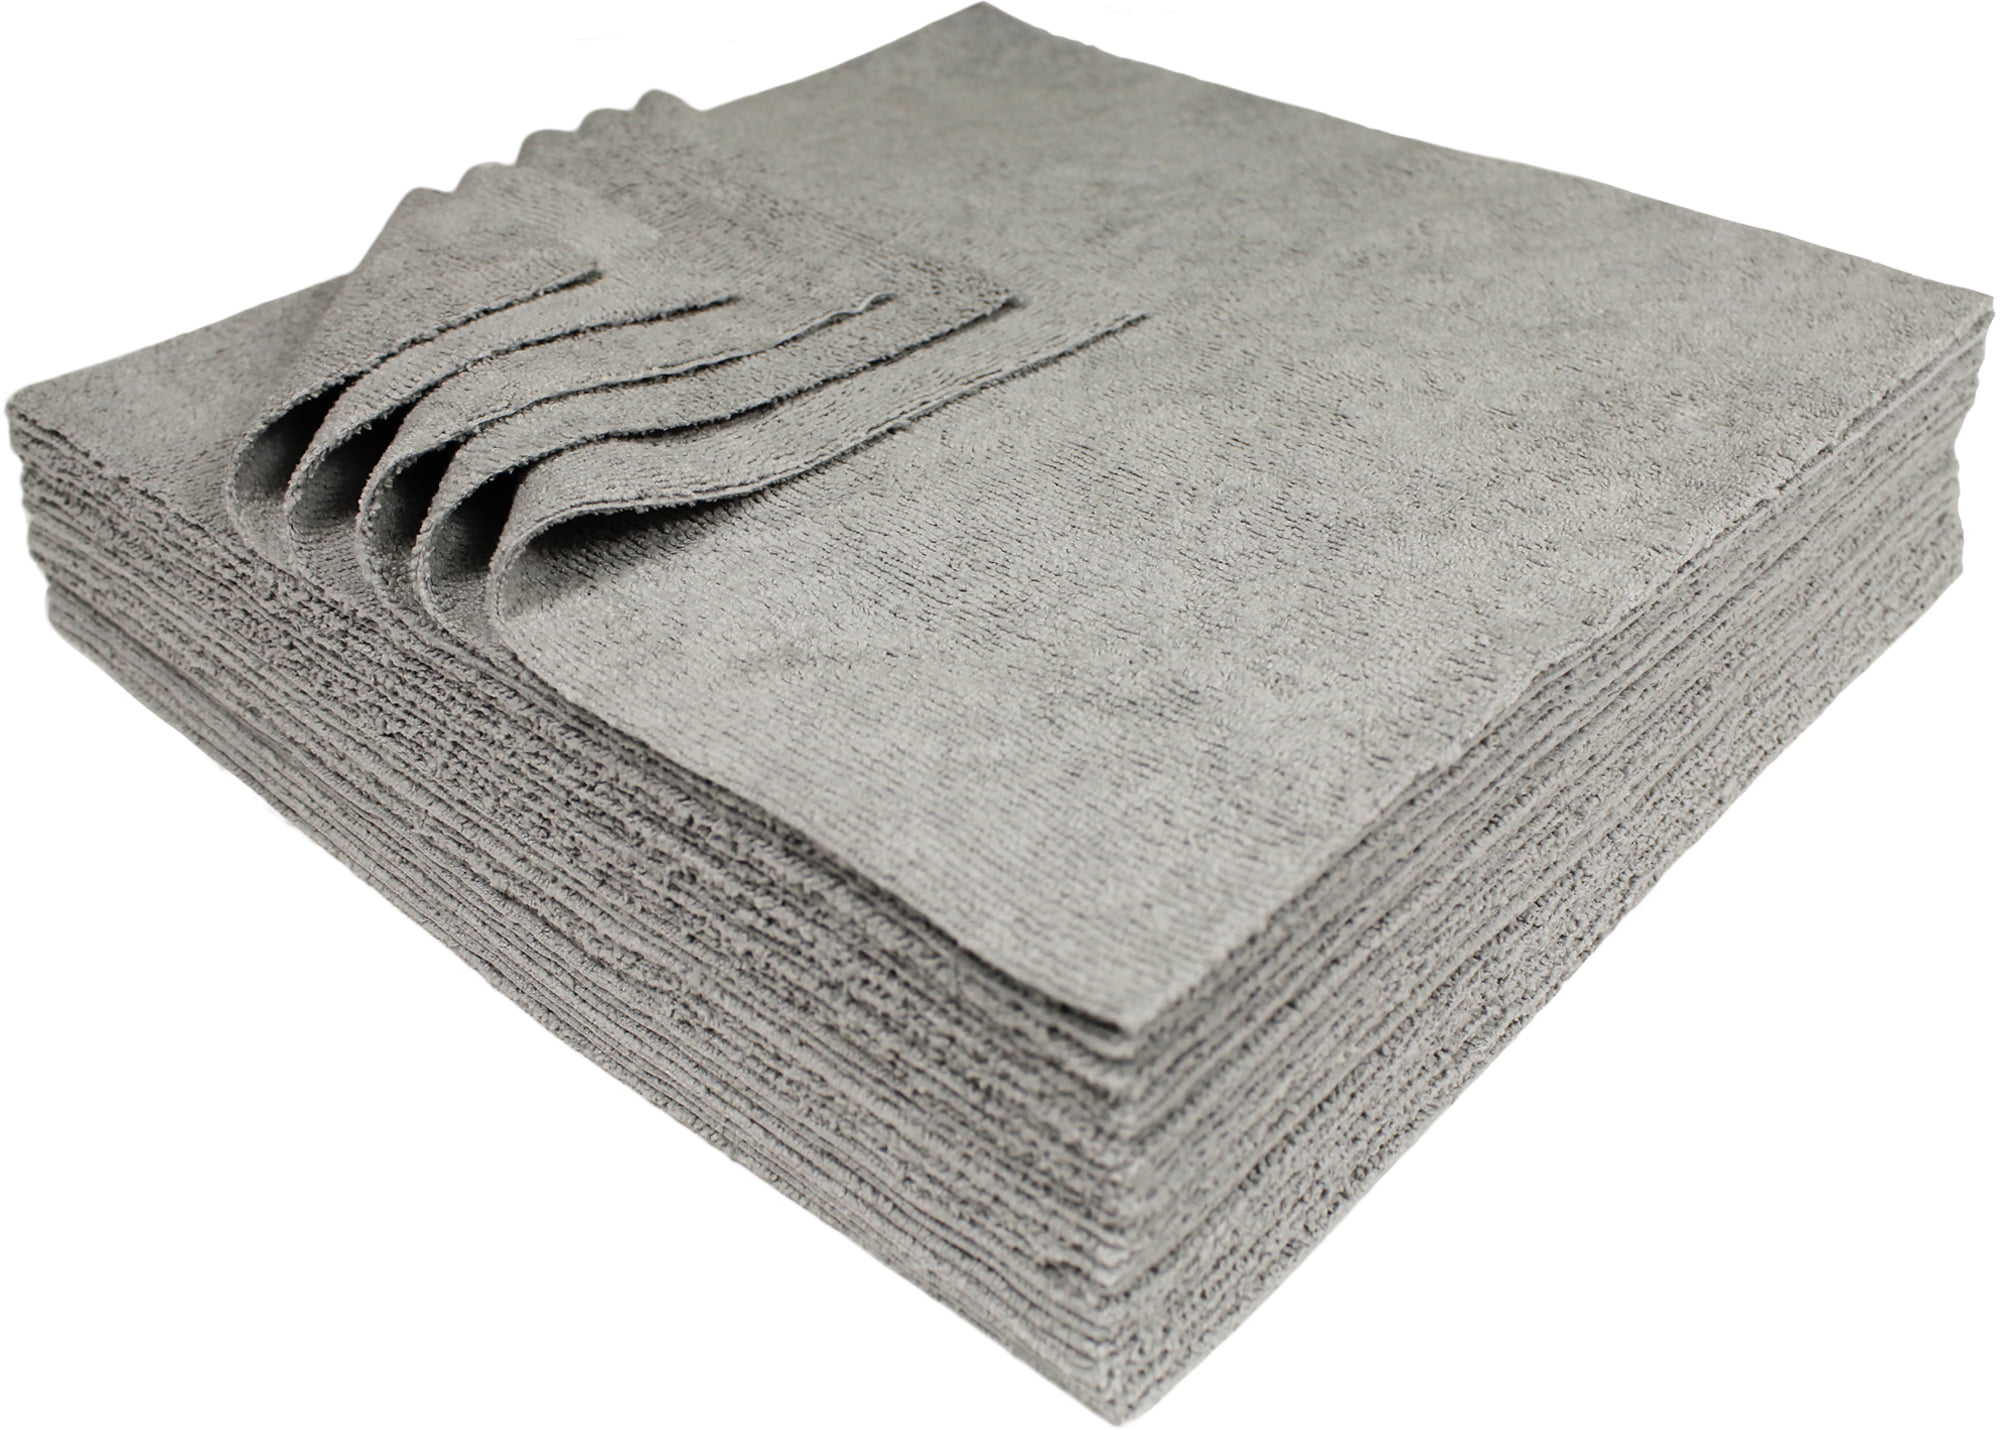 Eurow Microfiber Suede Weave Finish Towels 3 Pack